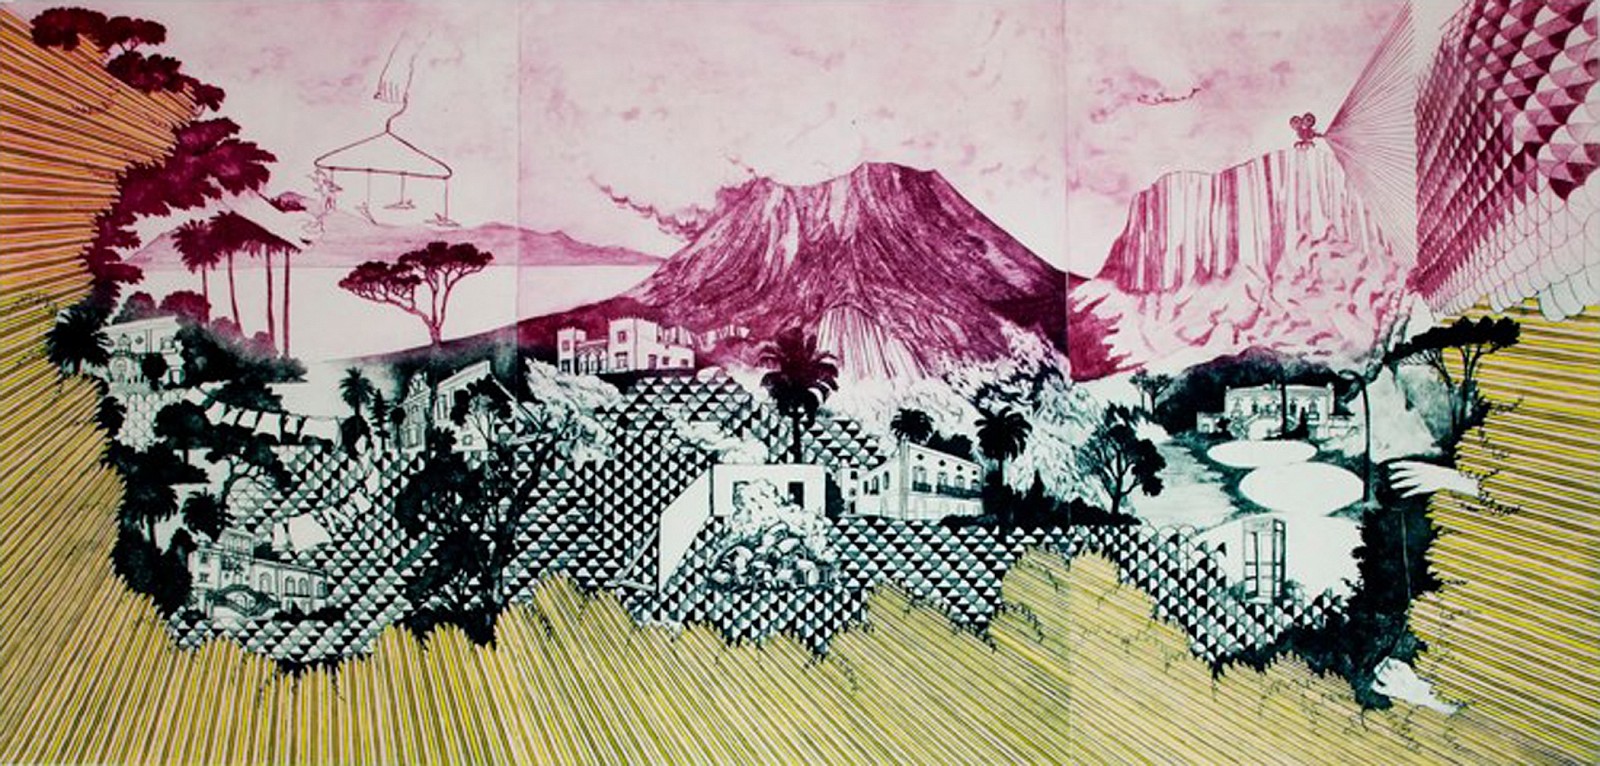 Serena Perrone
Approach and Descent, 2011
drypoint and spitbite aquatint wiped a la poupee, hand painting with gouache, 36 x 72 in.